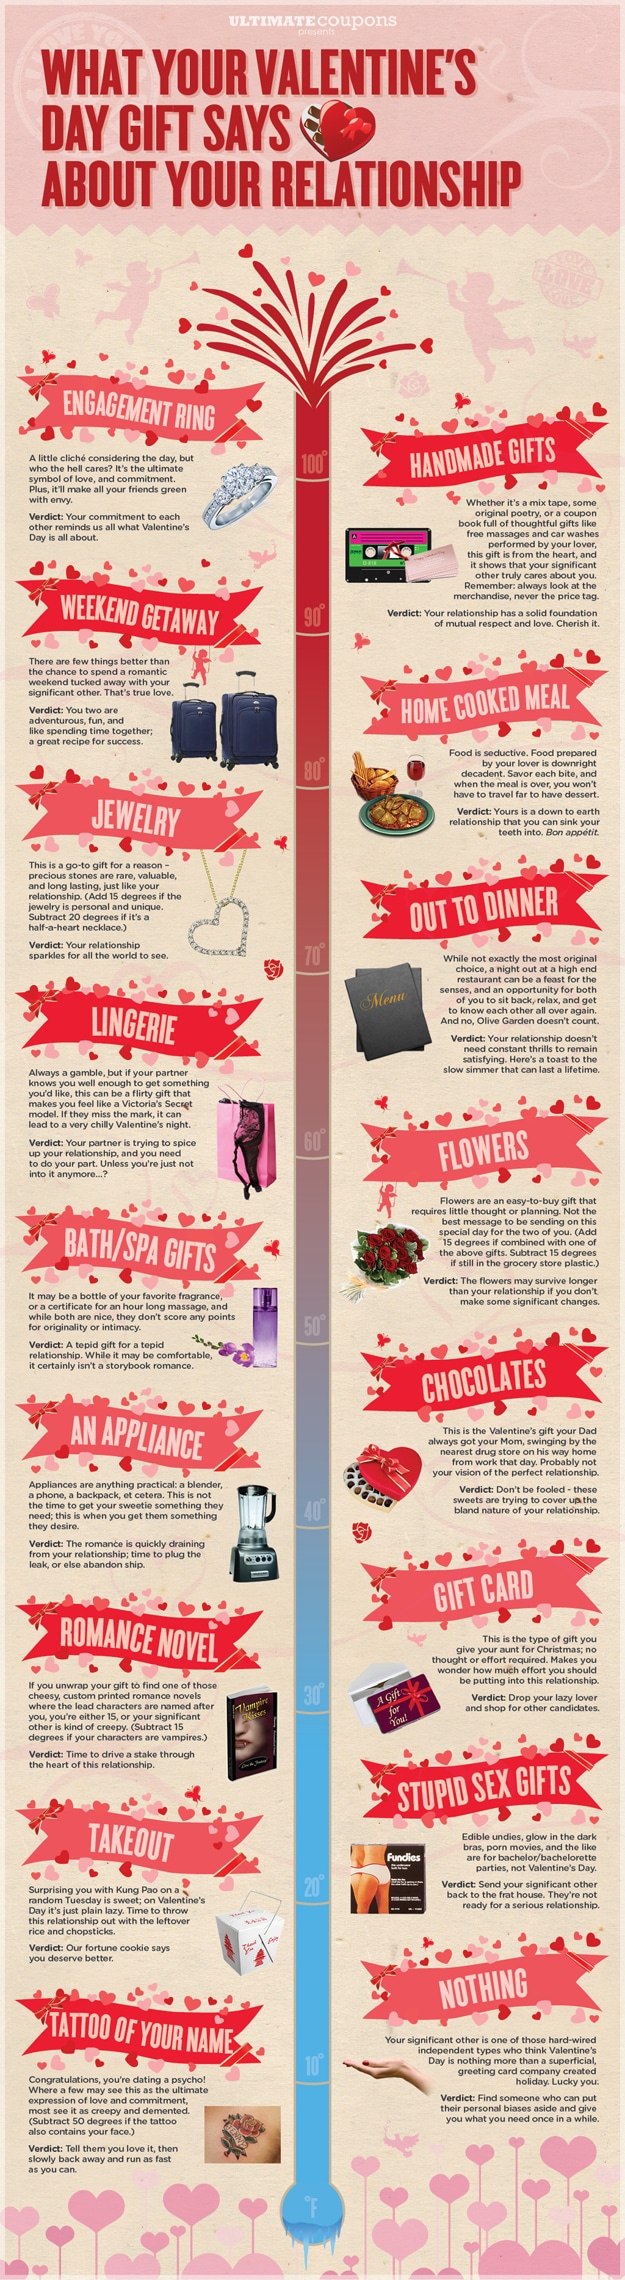 What Your Valentine’s Gift Says About Your Relationship [Infographic]